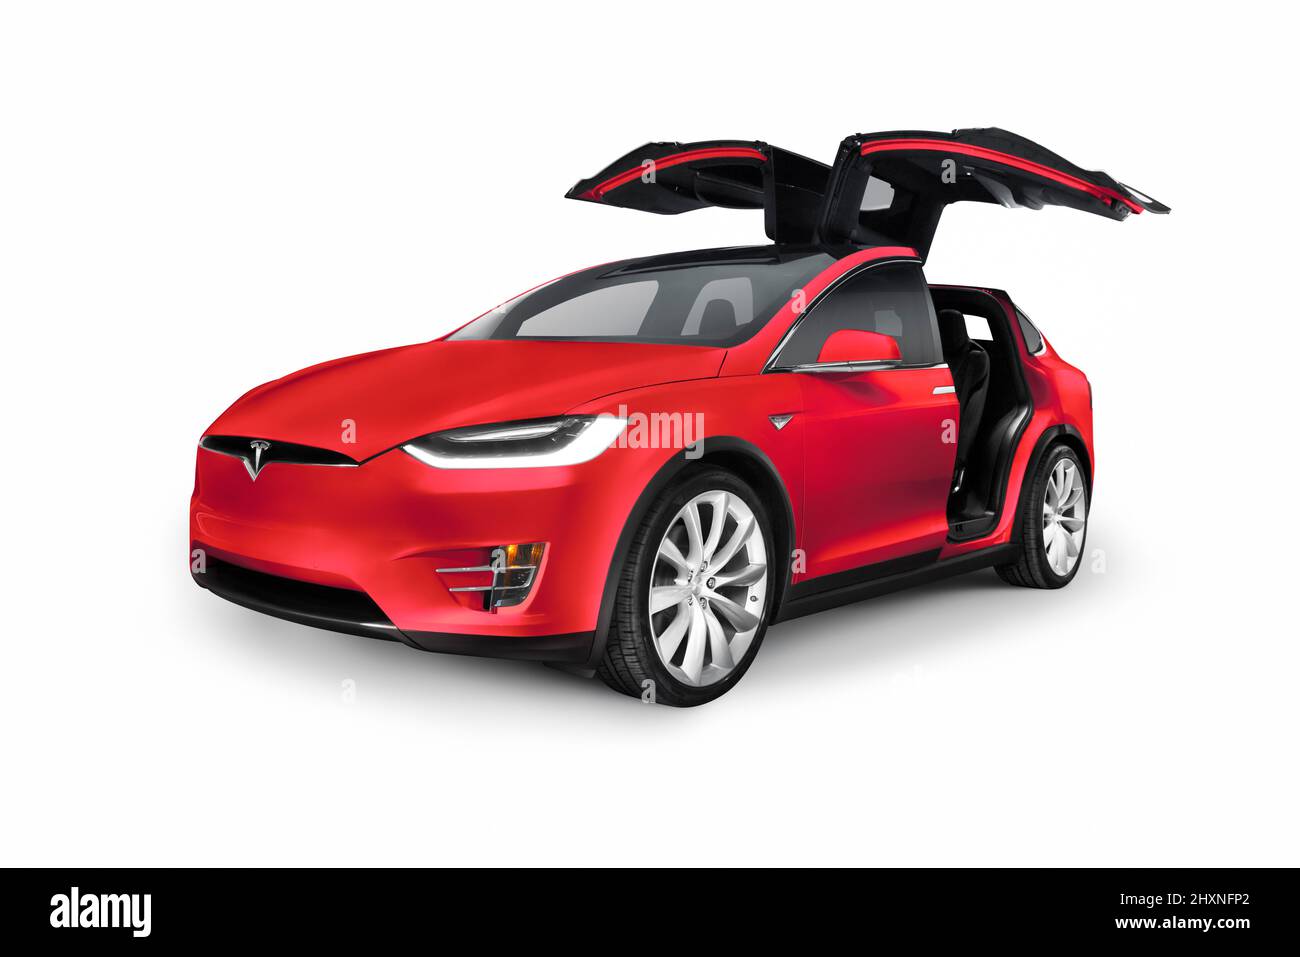 Red 2017 Tesla Model X luxury SUV electric car with open falcon wing doors isolated on white background Stock Photo